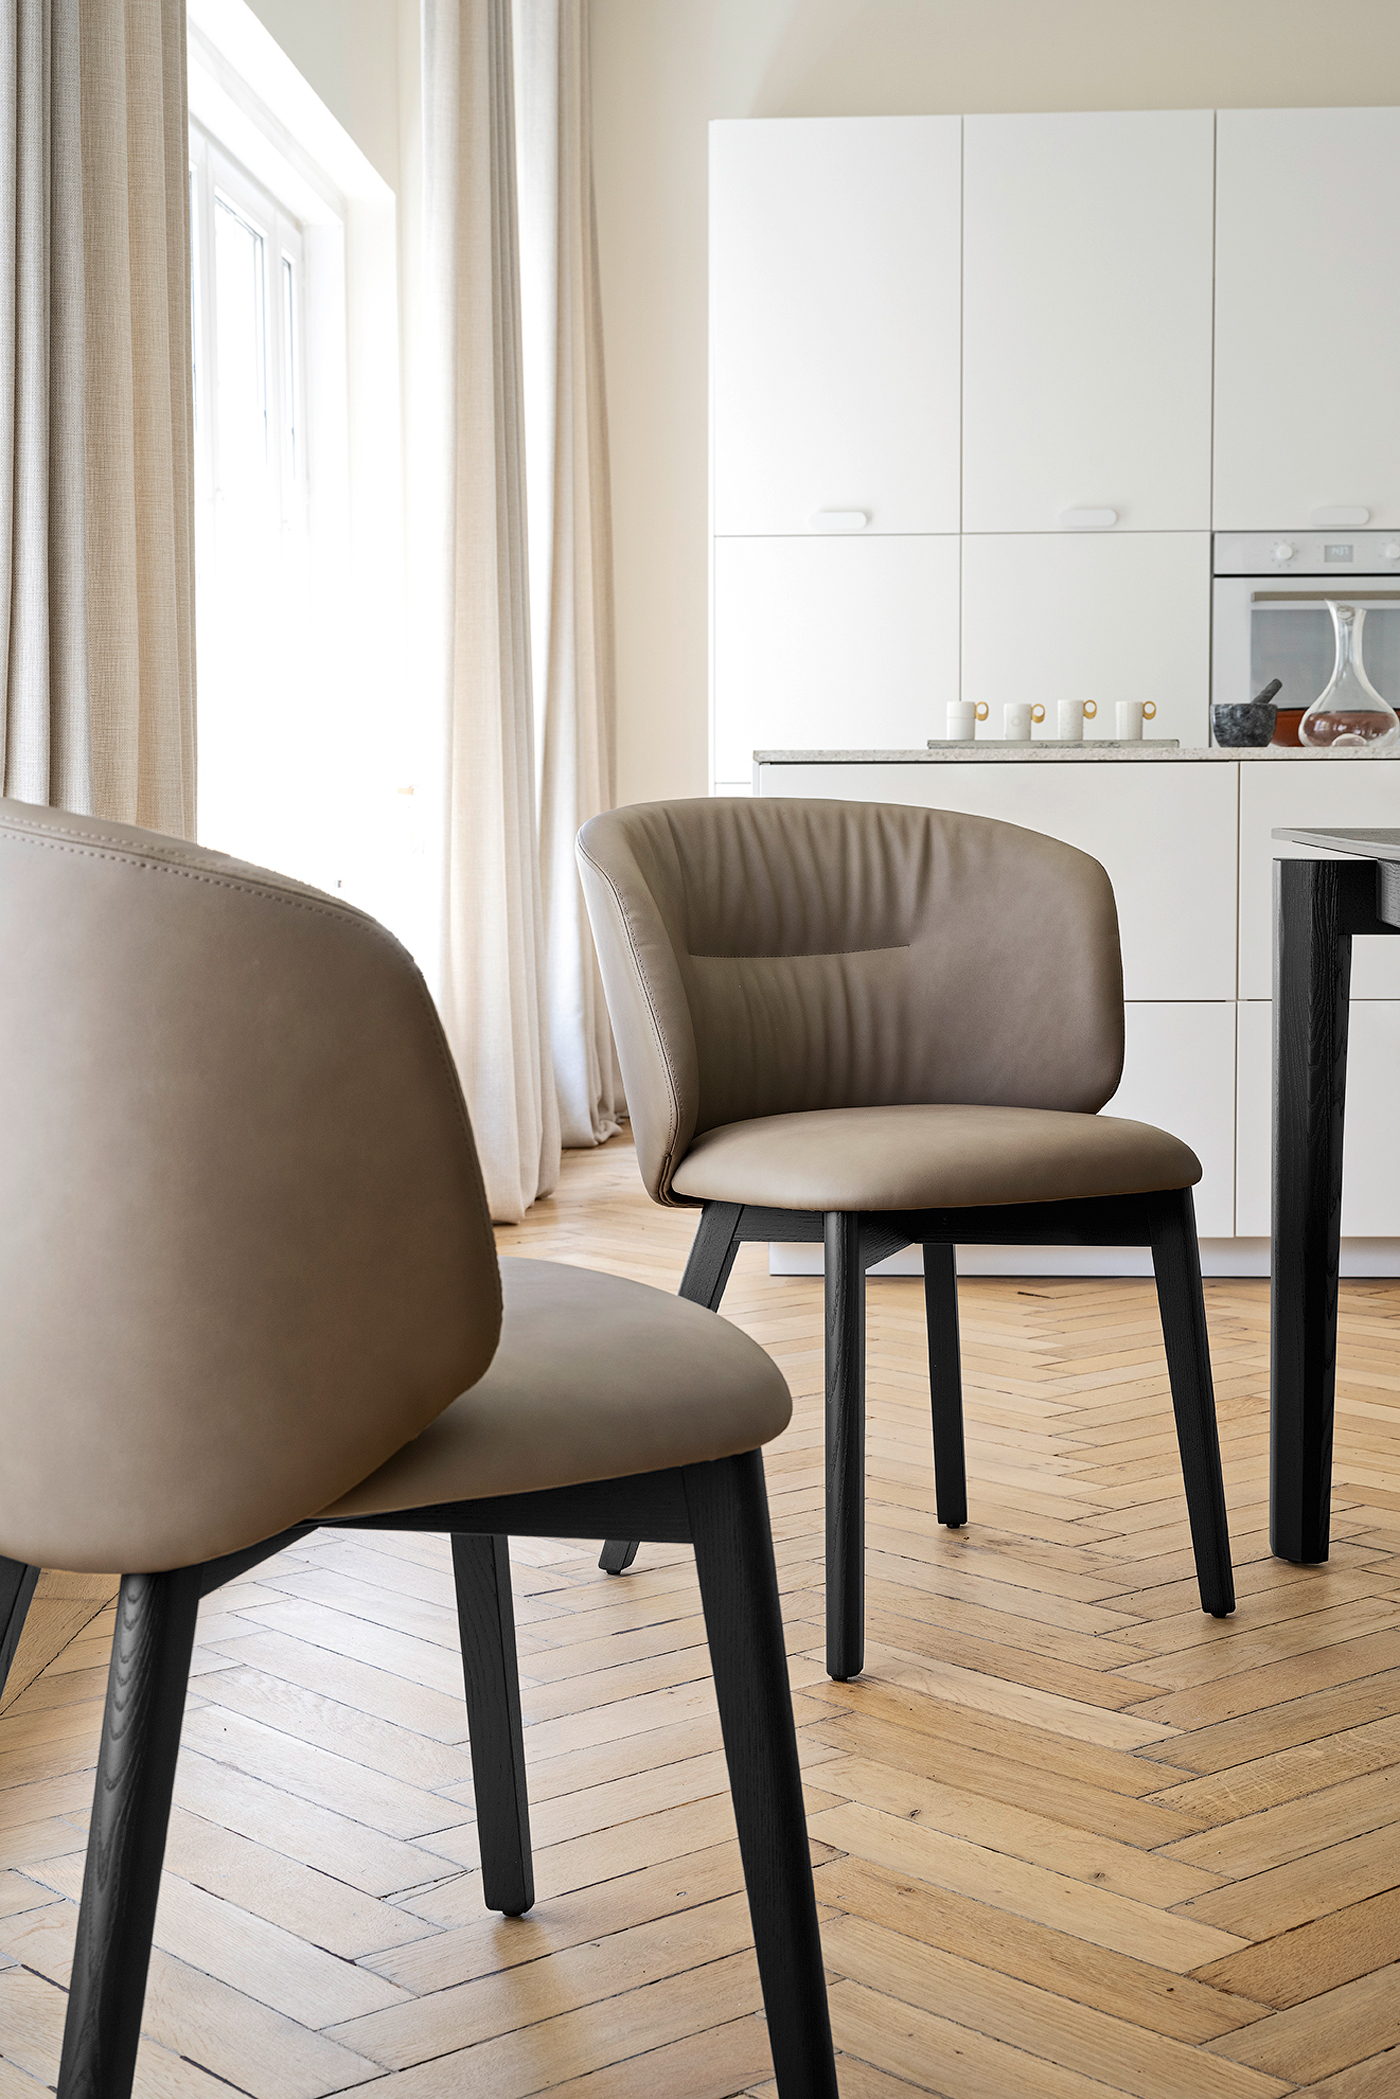 Manufacturer Calligaris has a new collection – Capsule